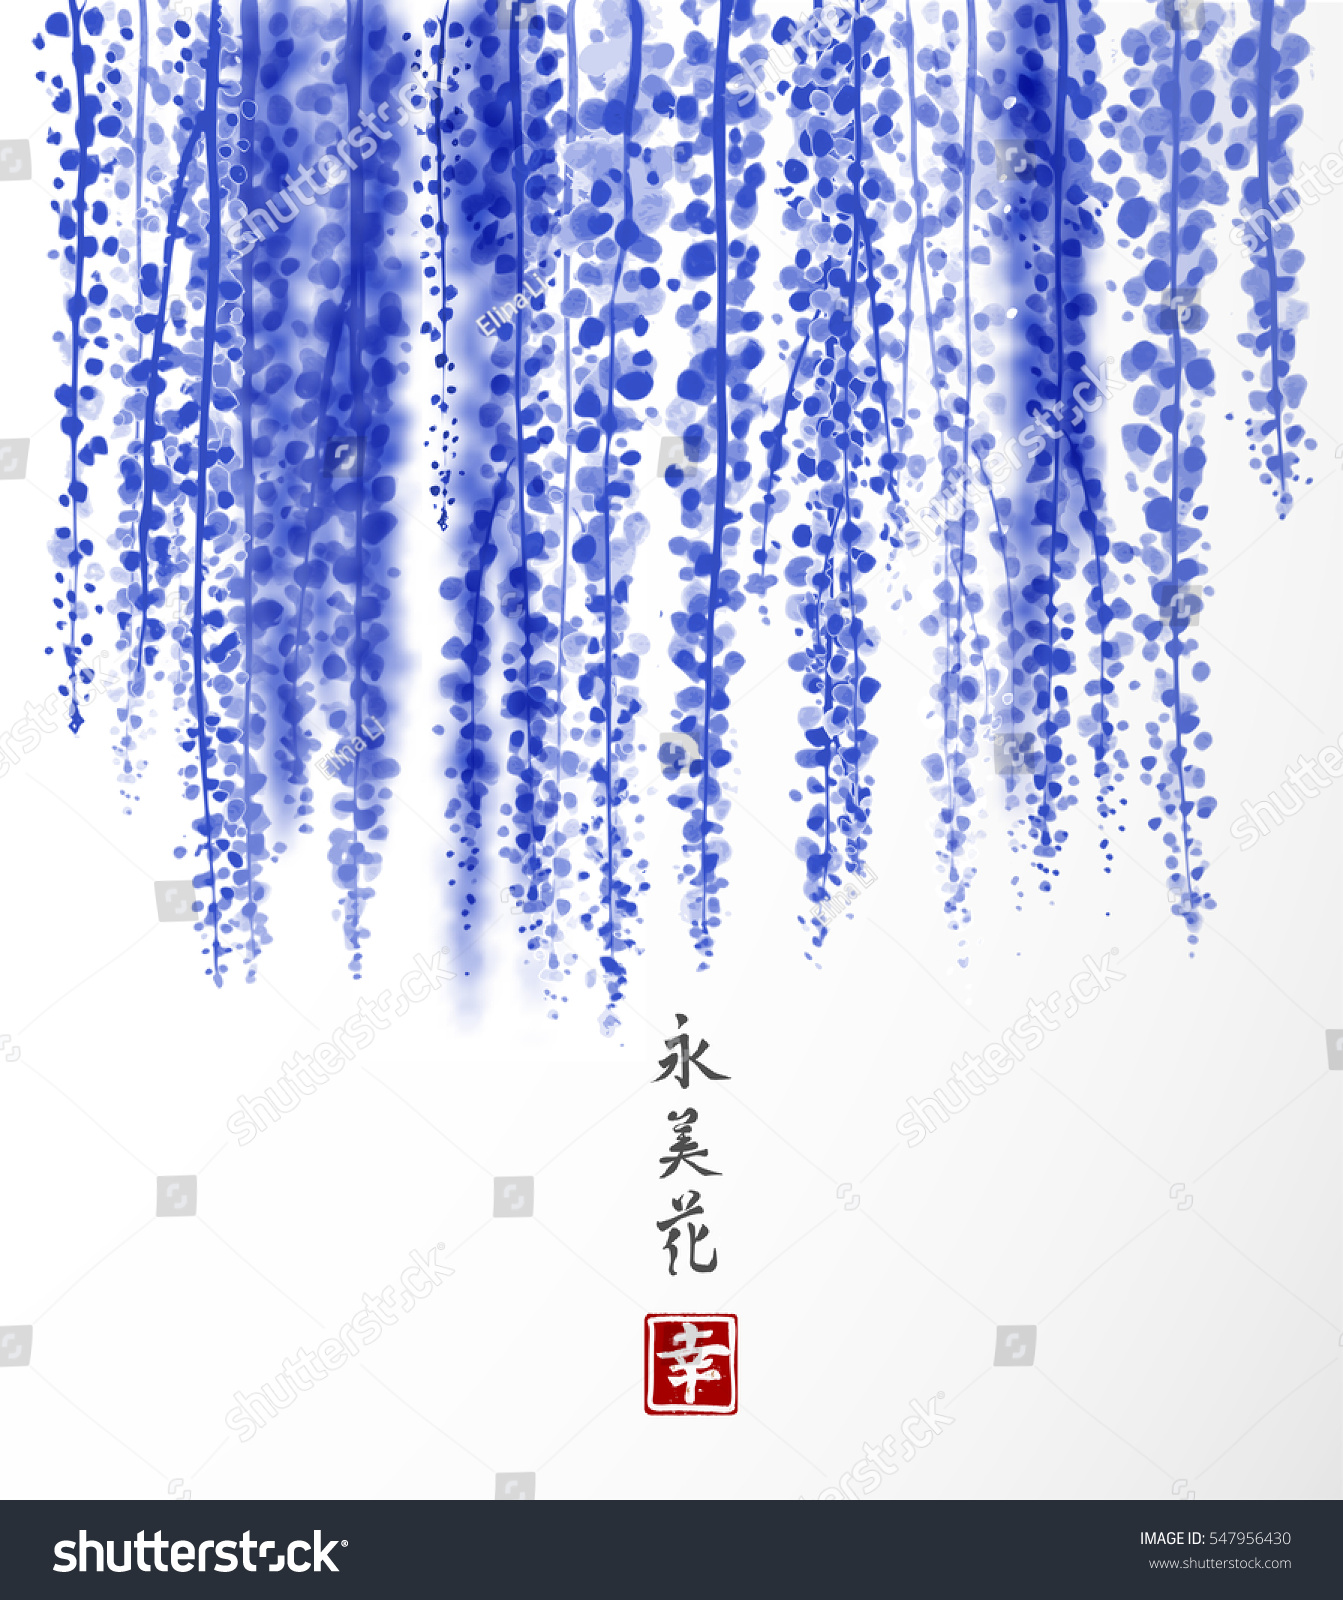 SVG of Wisteria hand drawn with ink on white background. Traditional oriental ink painting sumi-e, u-sin, go-hua. Contains hieroglyph - happiness, eternity, beauty, flower. Bunches of flowers. svg